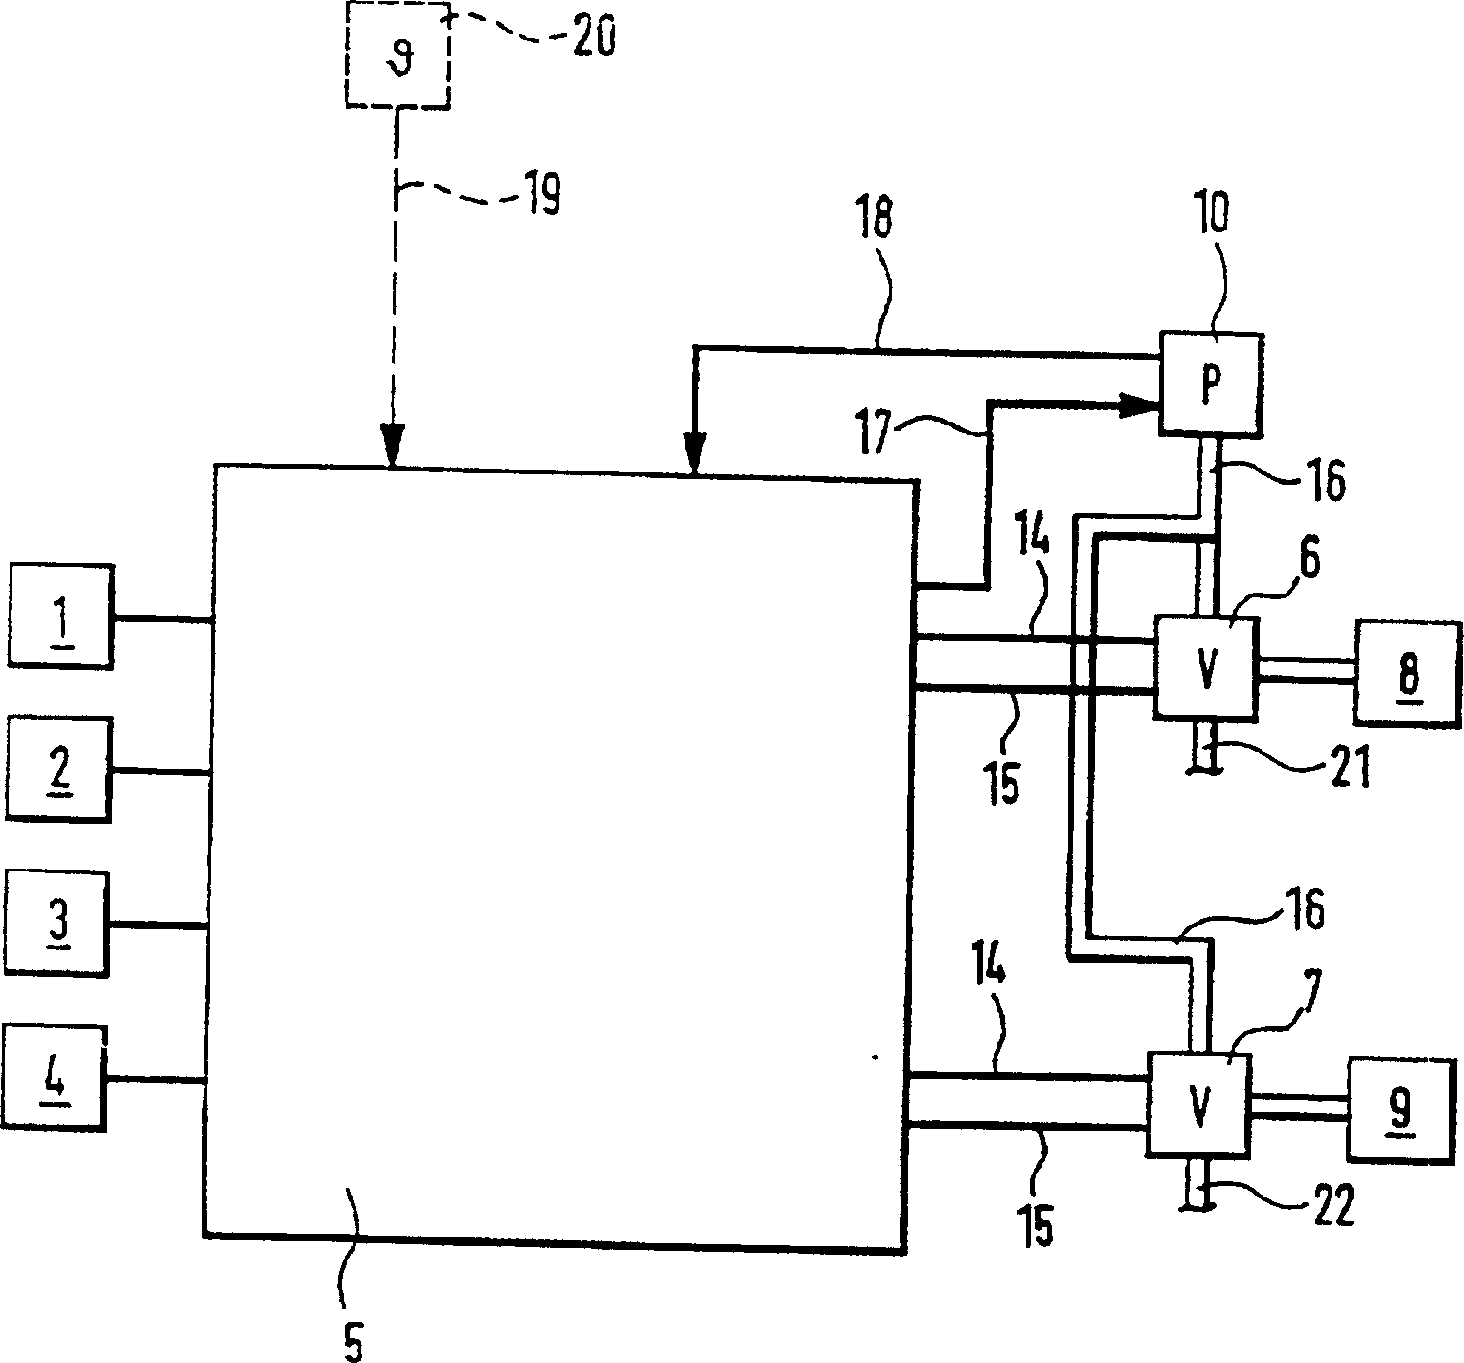 Process and device for controlling vehicle braking system